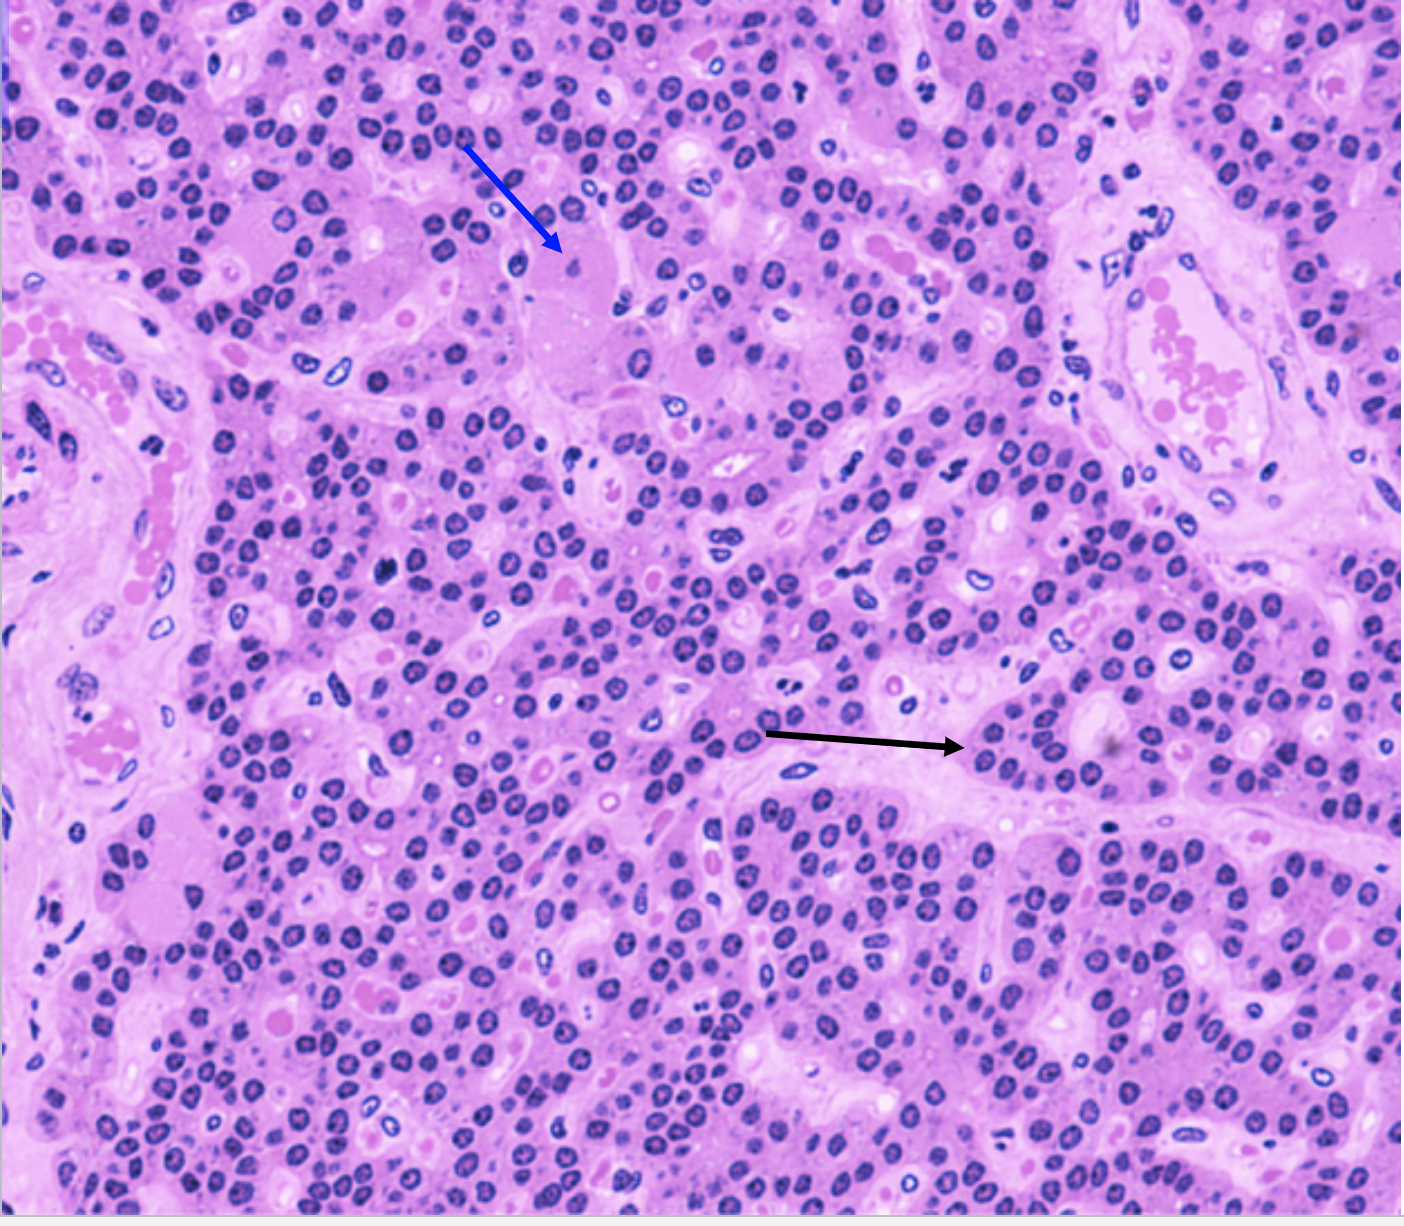 <p>In this image of the parathyroid, what does the black arrow indicate?</p>